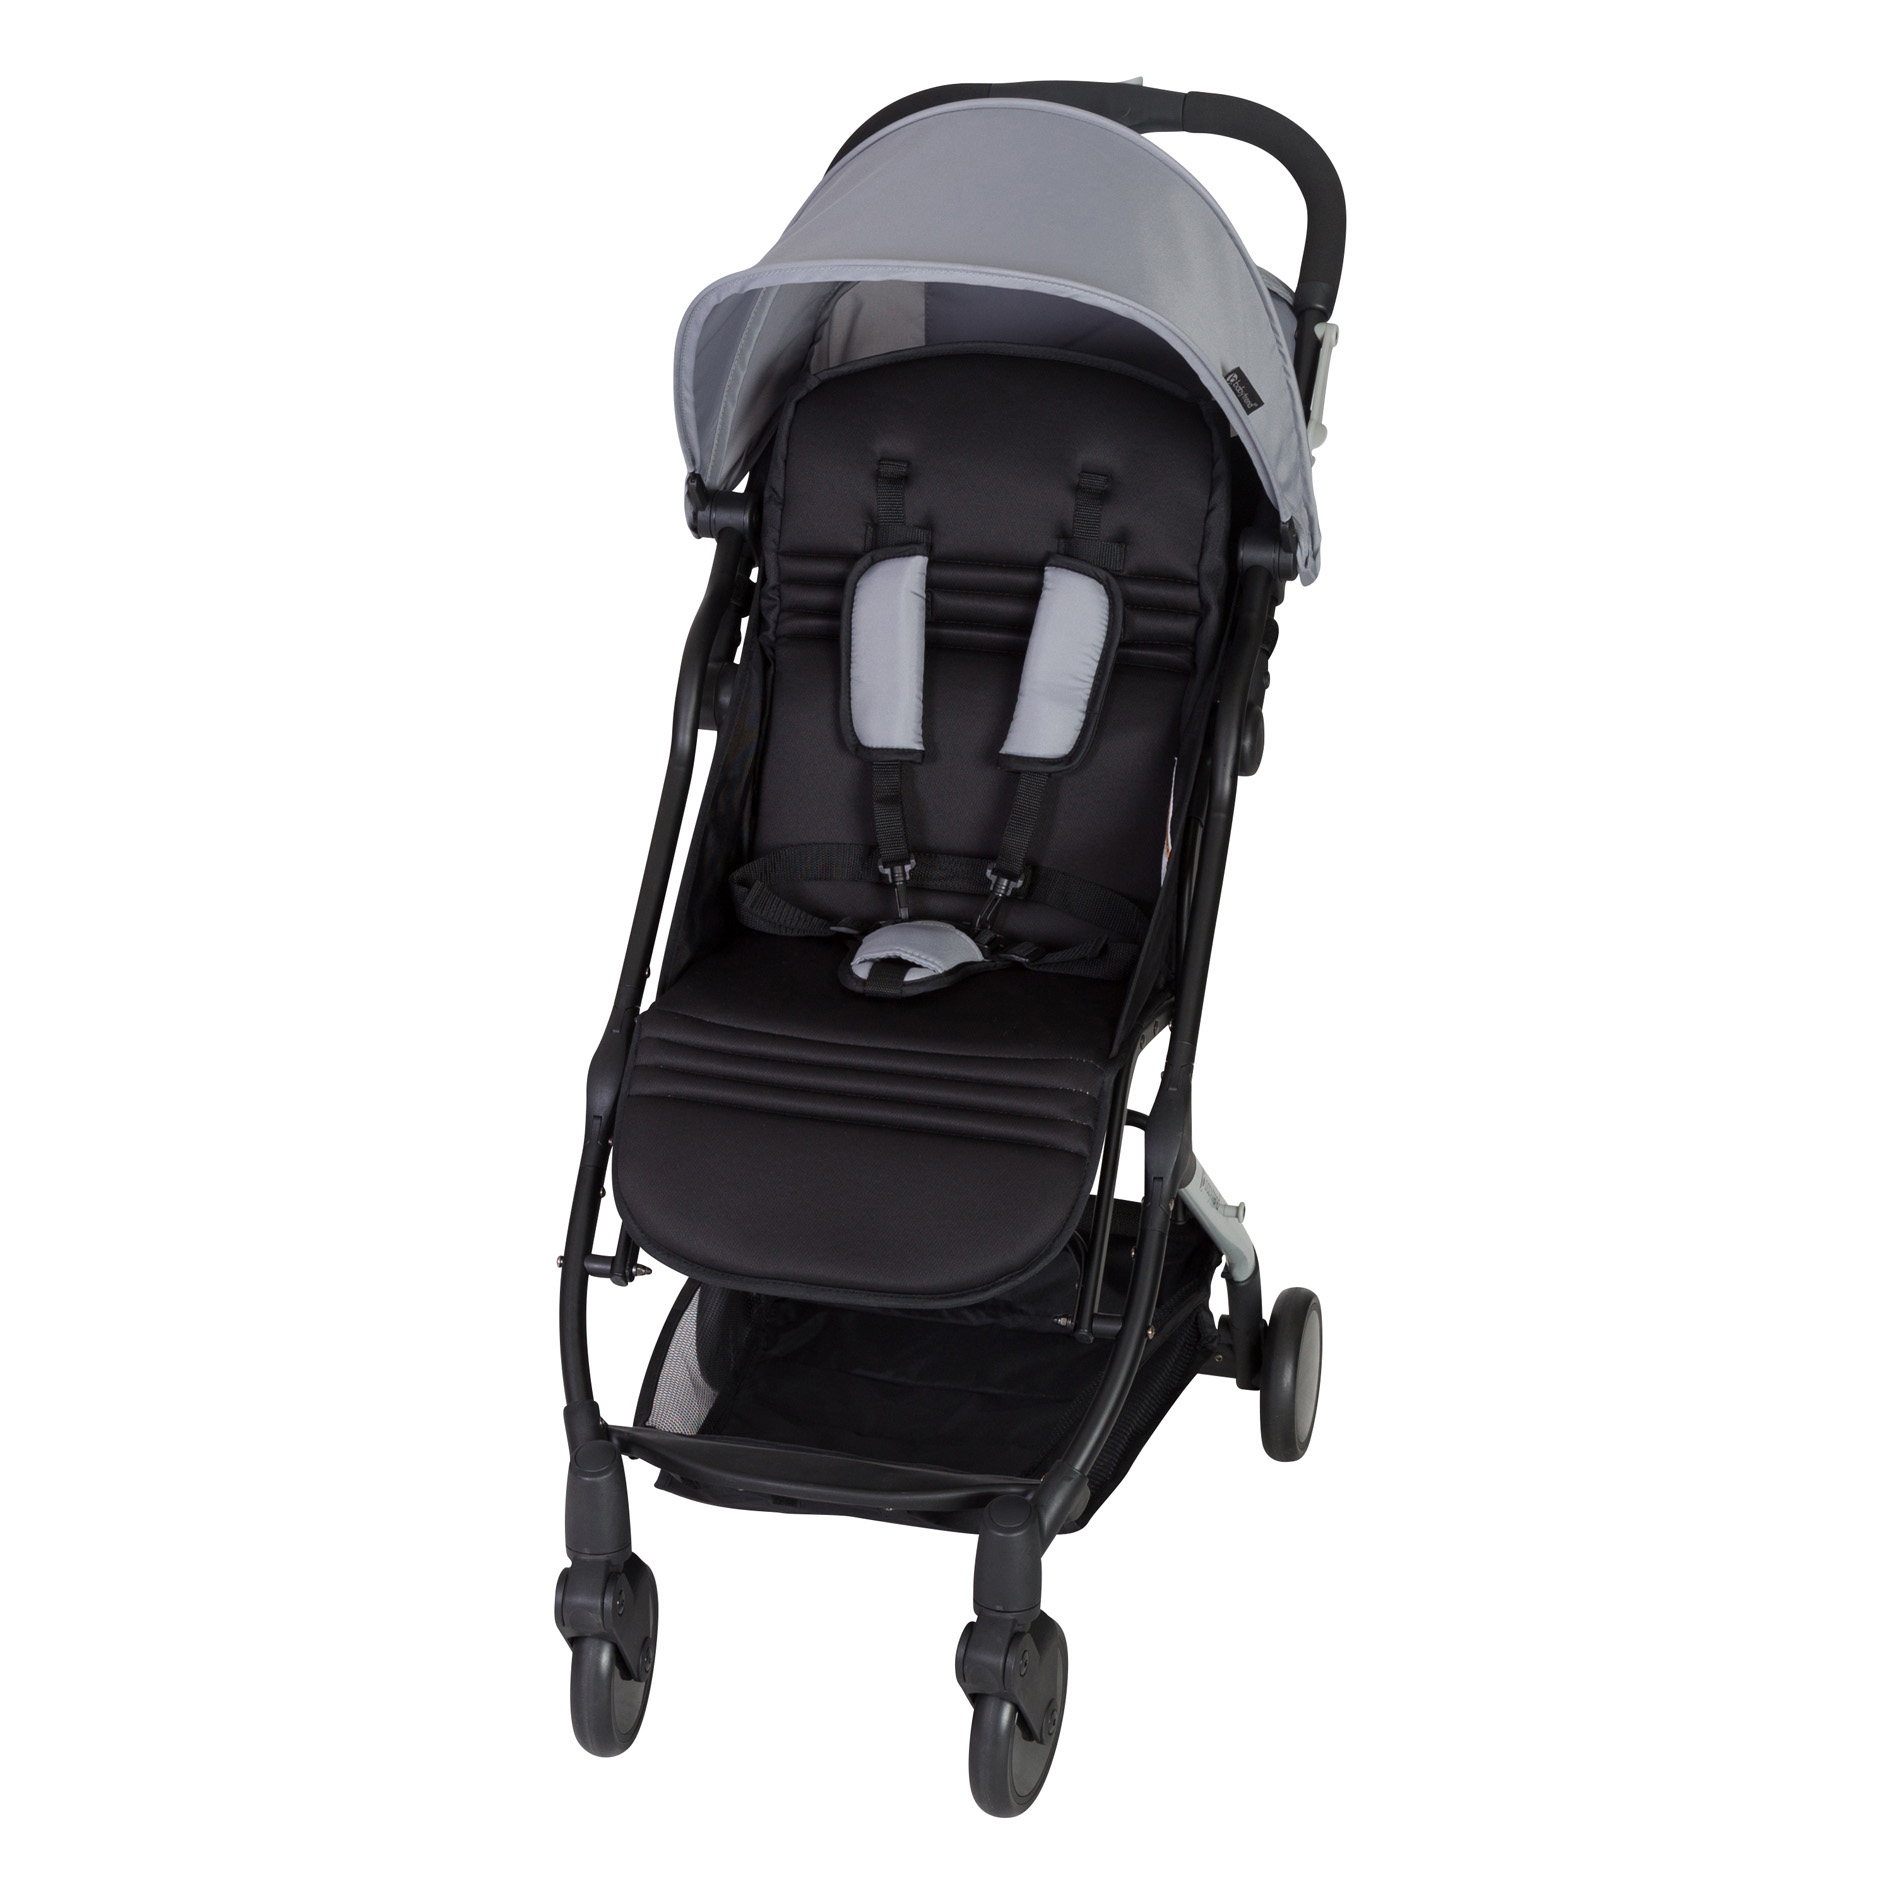 kmart baby car seats and strollers